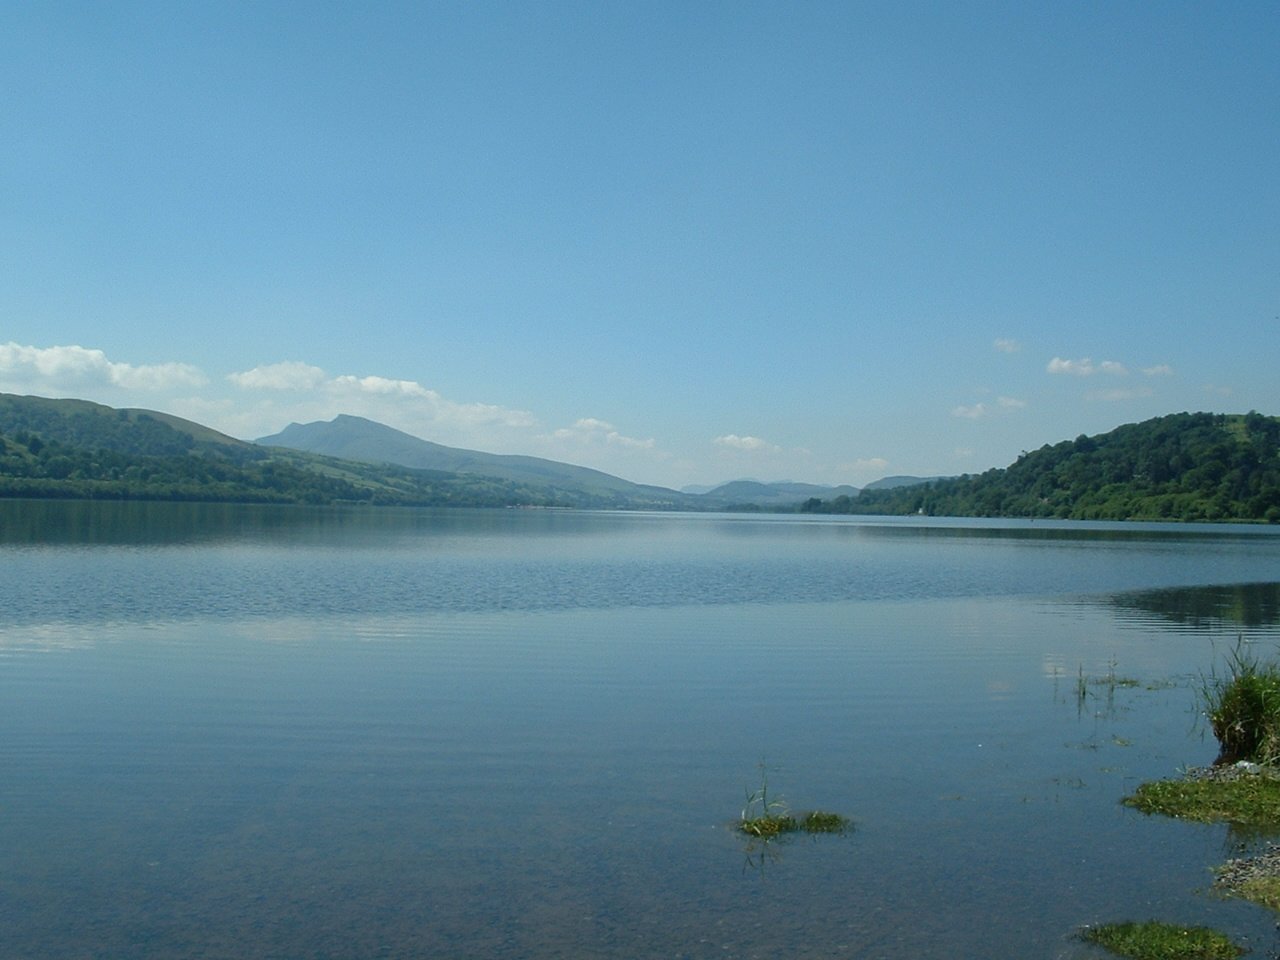 Bala Lake © Mecrothesp https://commons.wikimedia.org/w/index.php?curid=10513322